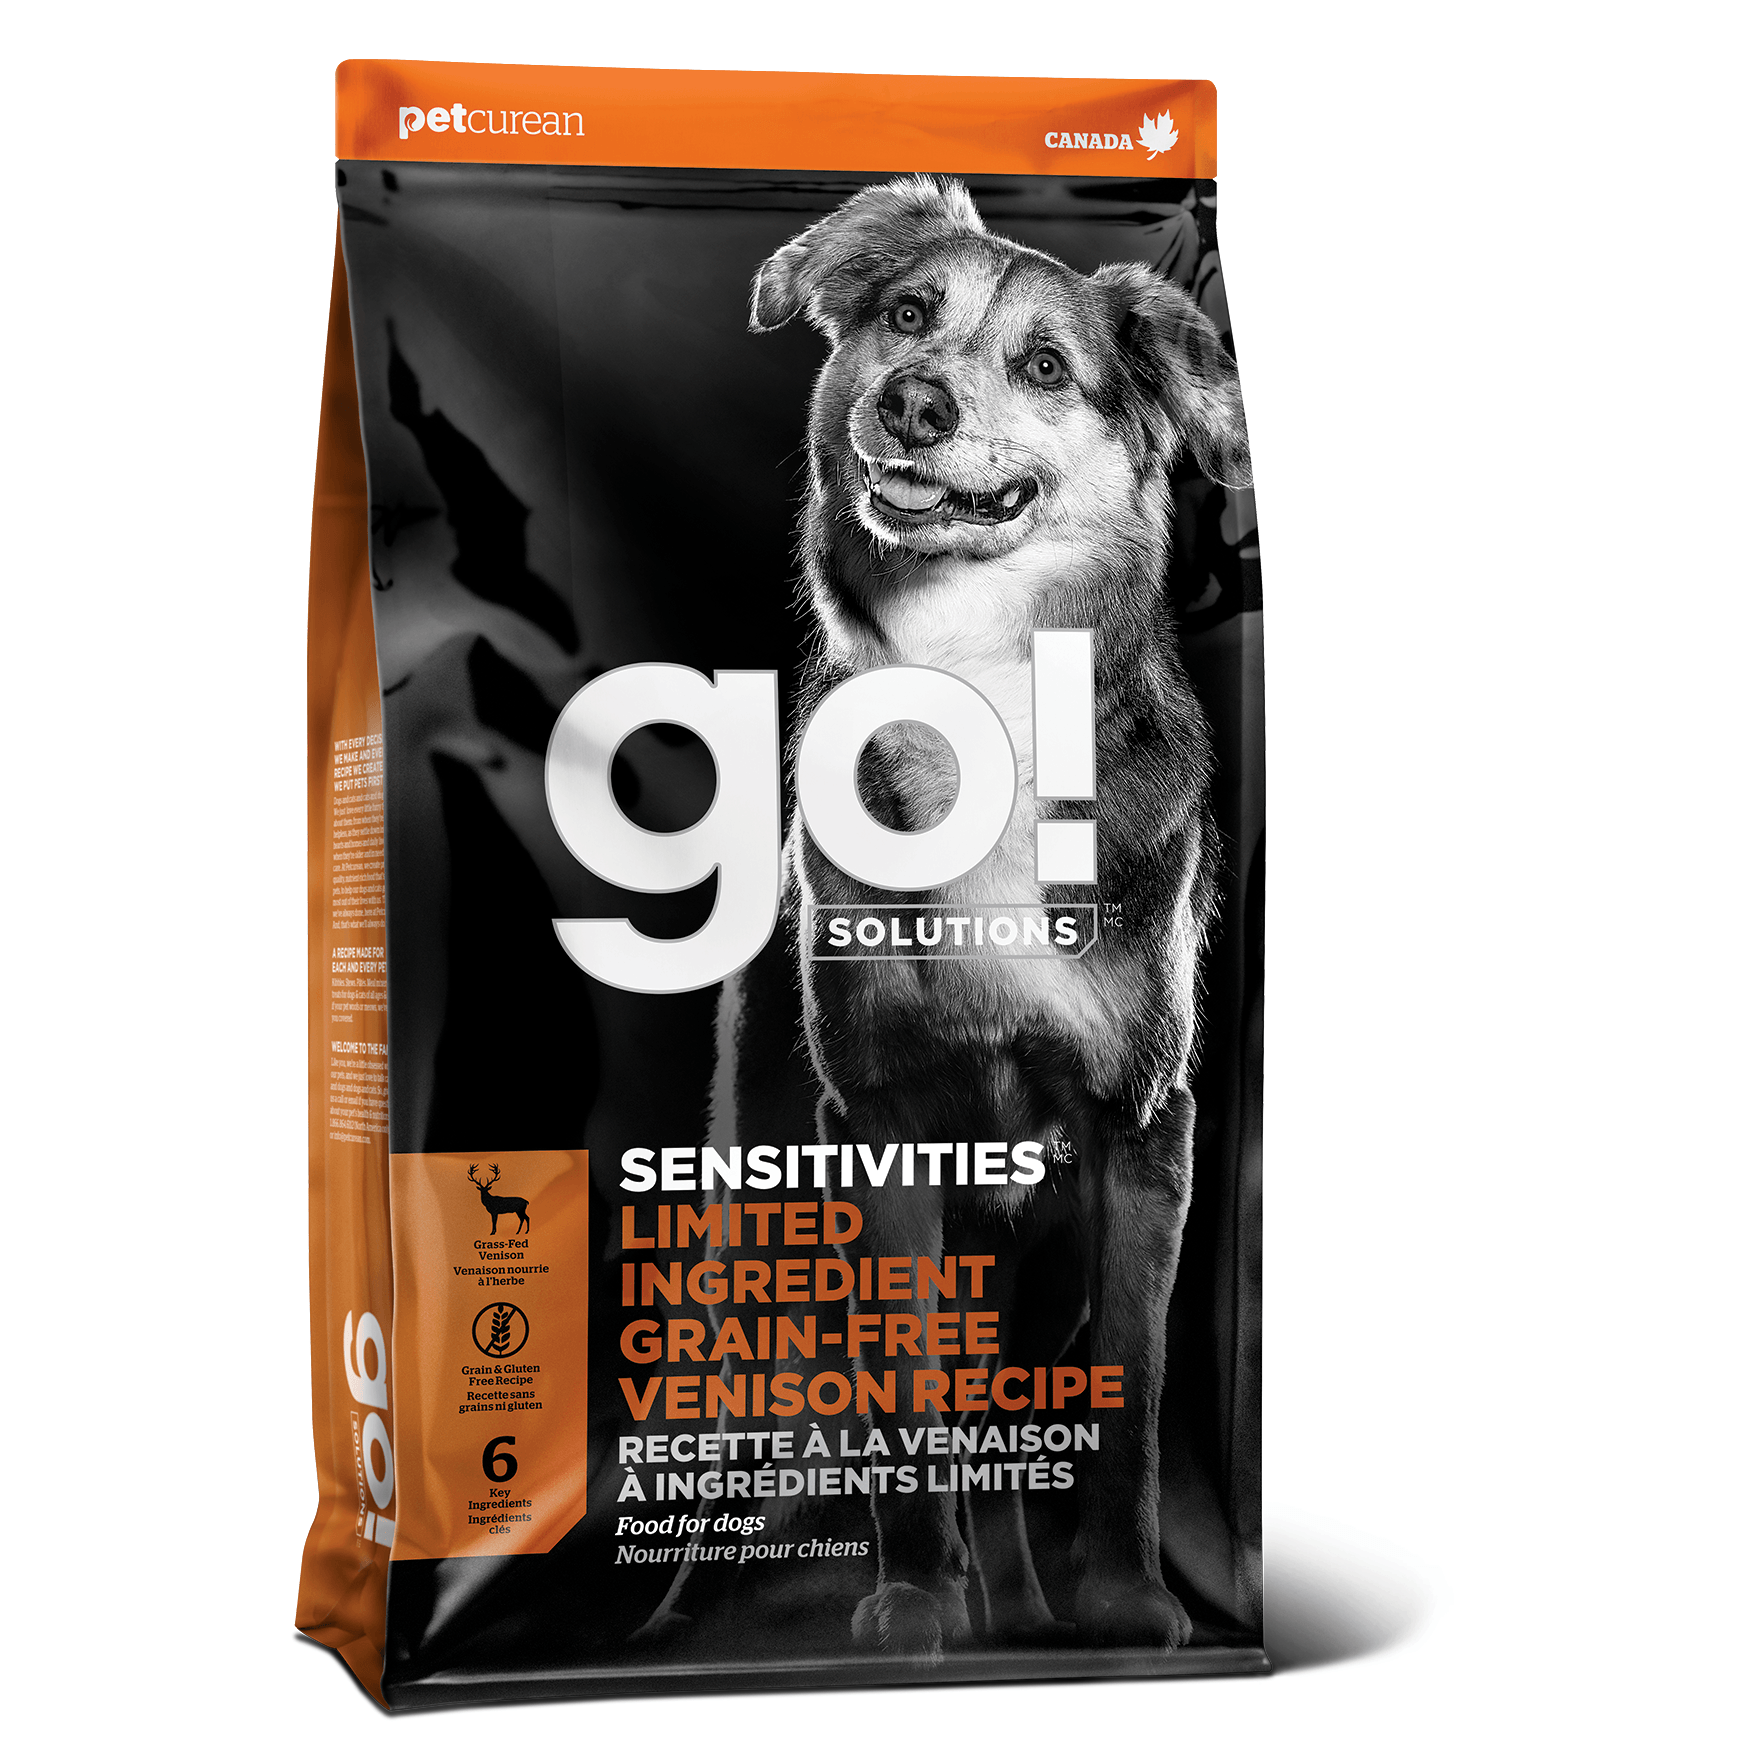 GO! SENSITIVITIES Limited Ingredient Grain Free Venison recipe for dogs  Dog Food  | PetMax Canada